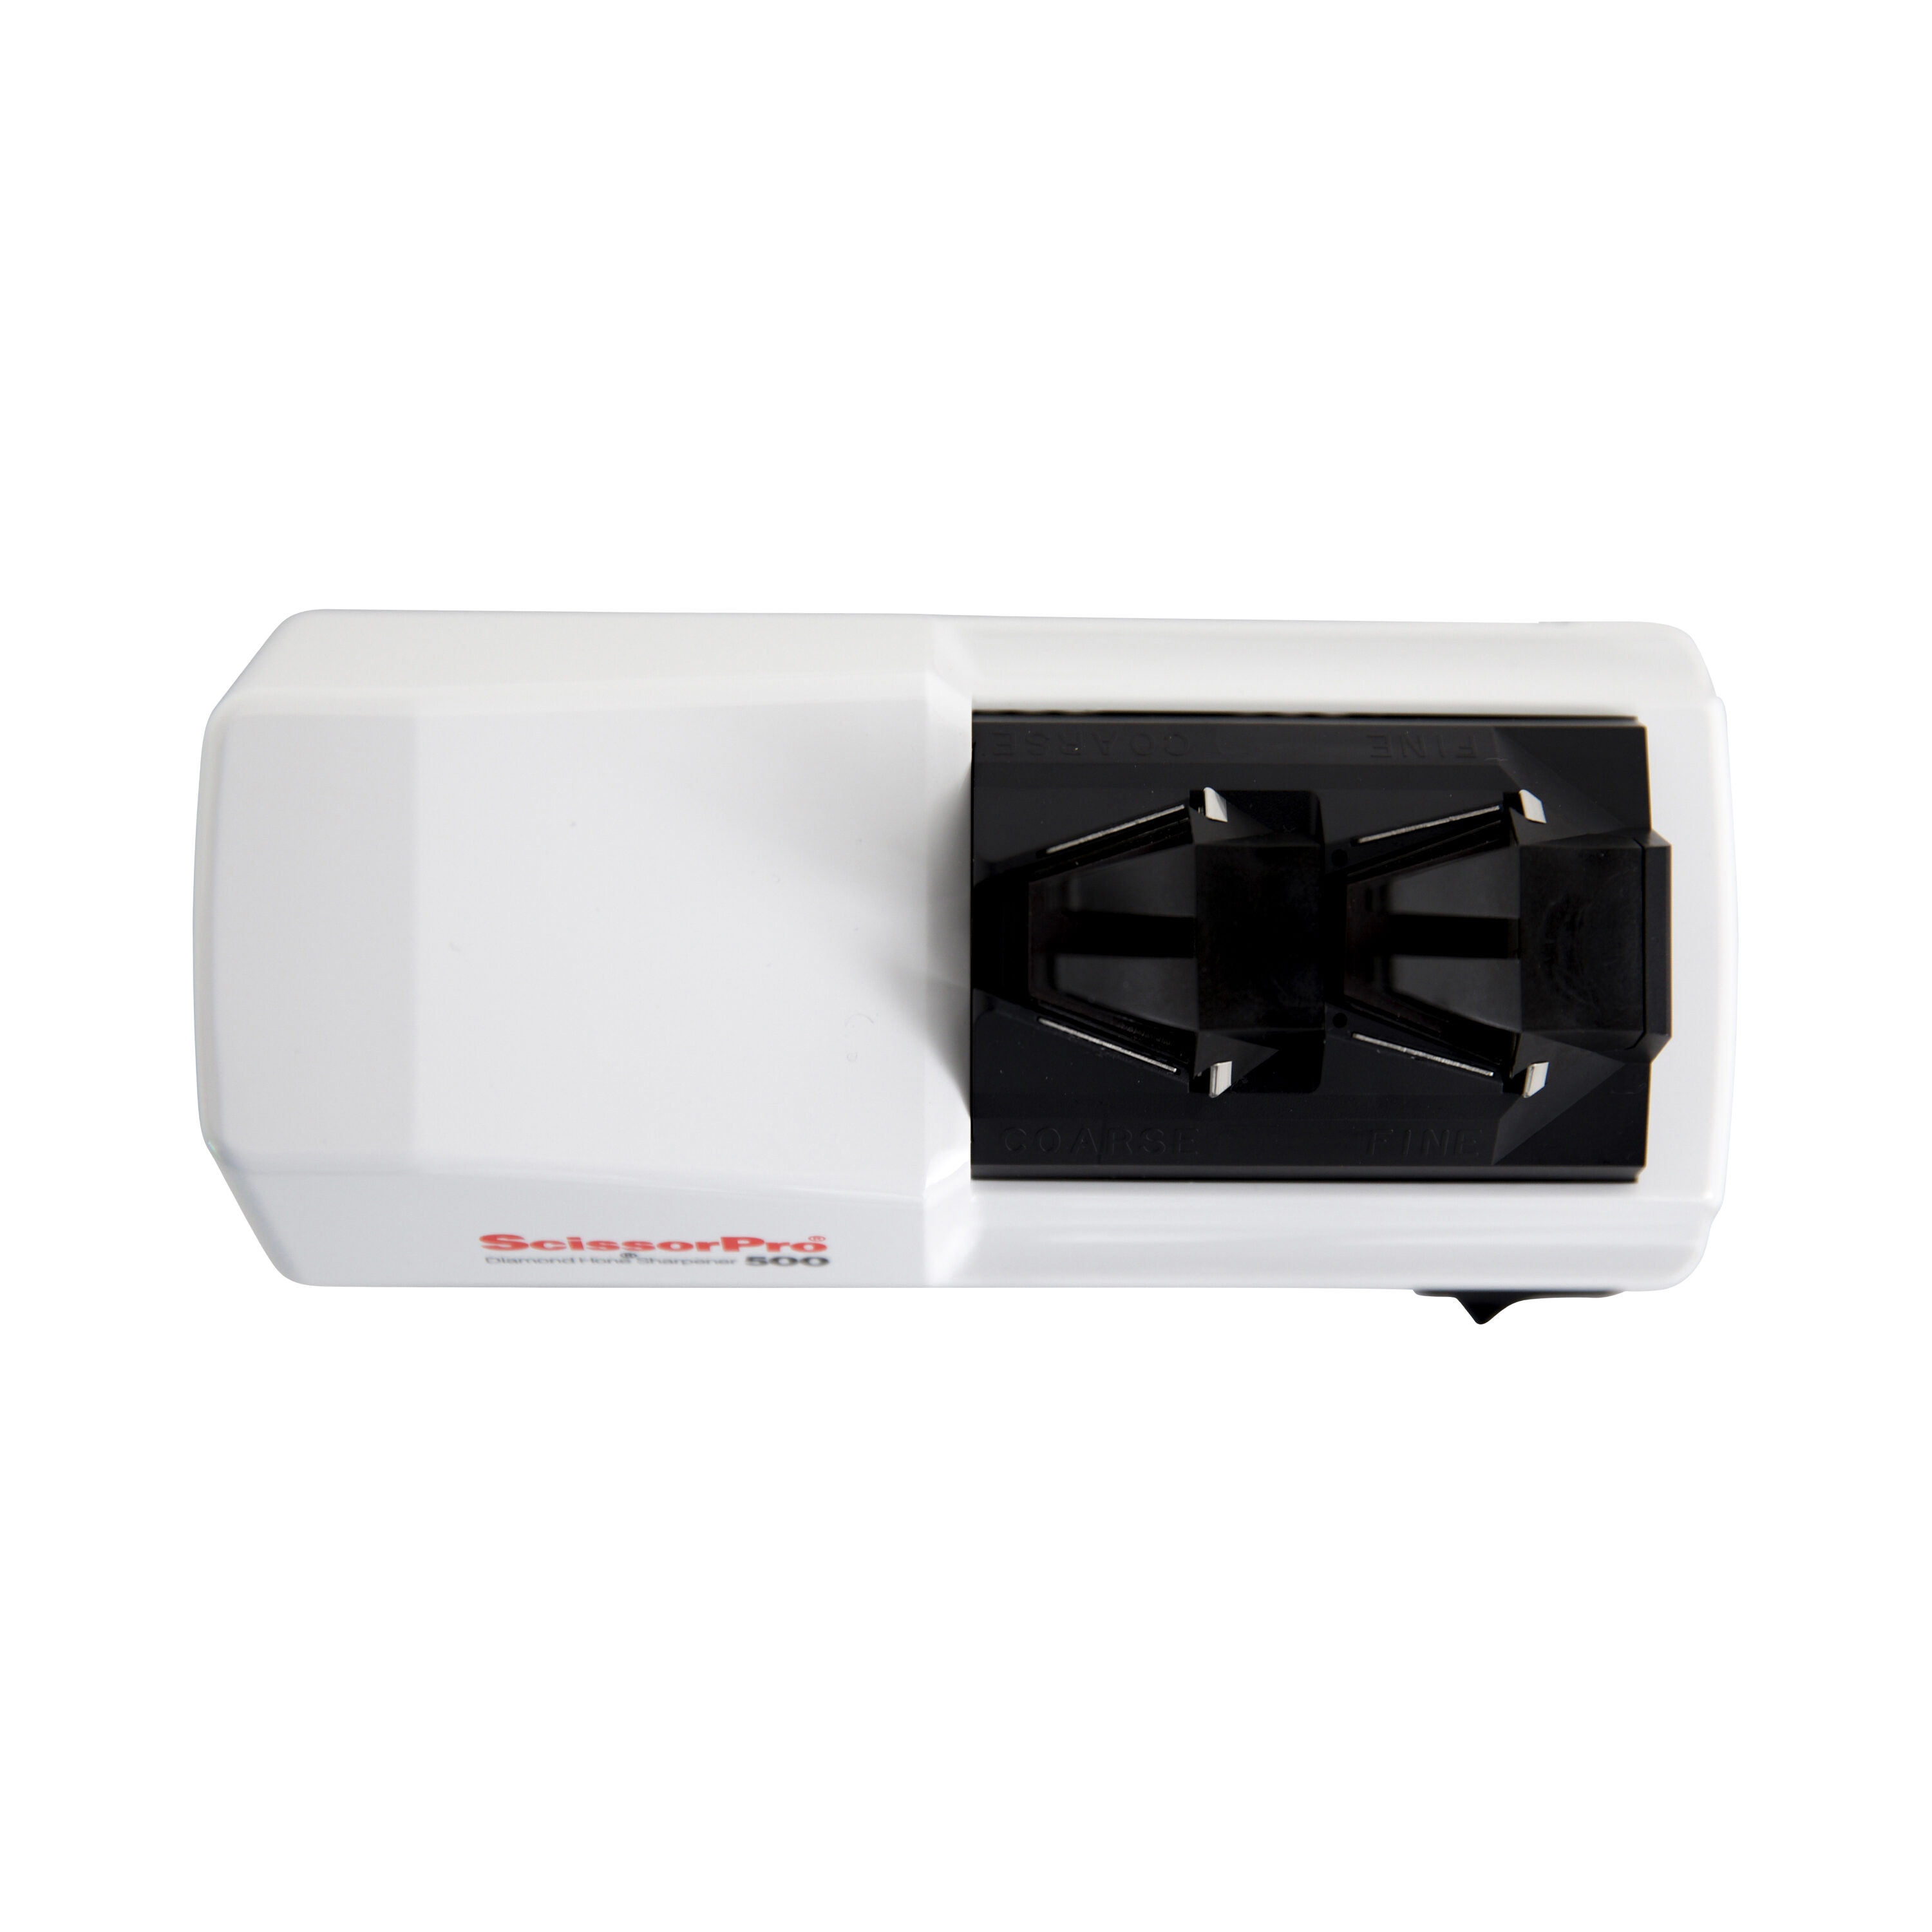 The ScissorPro® electric scissors sharpener uses 100% diamond abrasives and  built-in precision angle guides to help you quickly and easily apply  professional quality edges. It sharpens a wide variety of household scissors